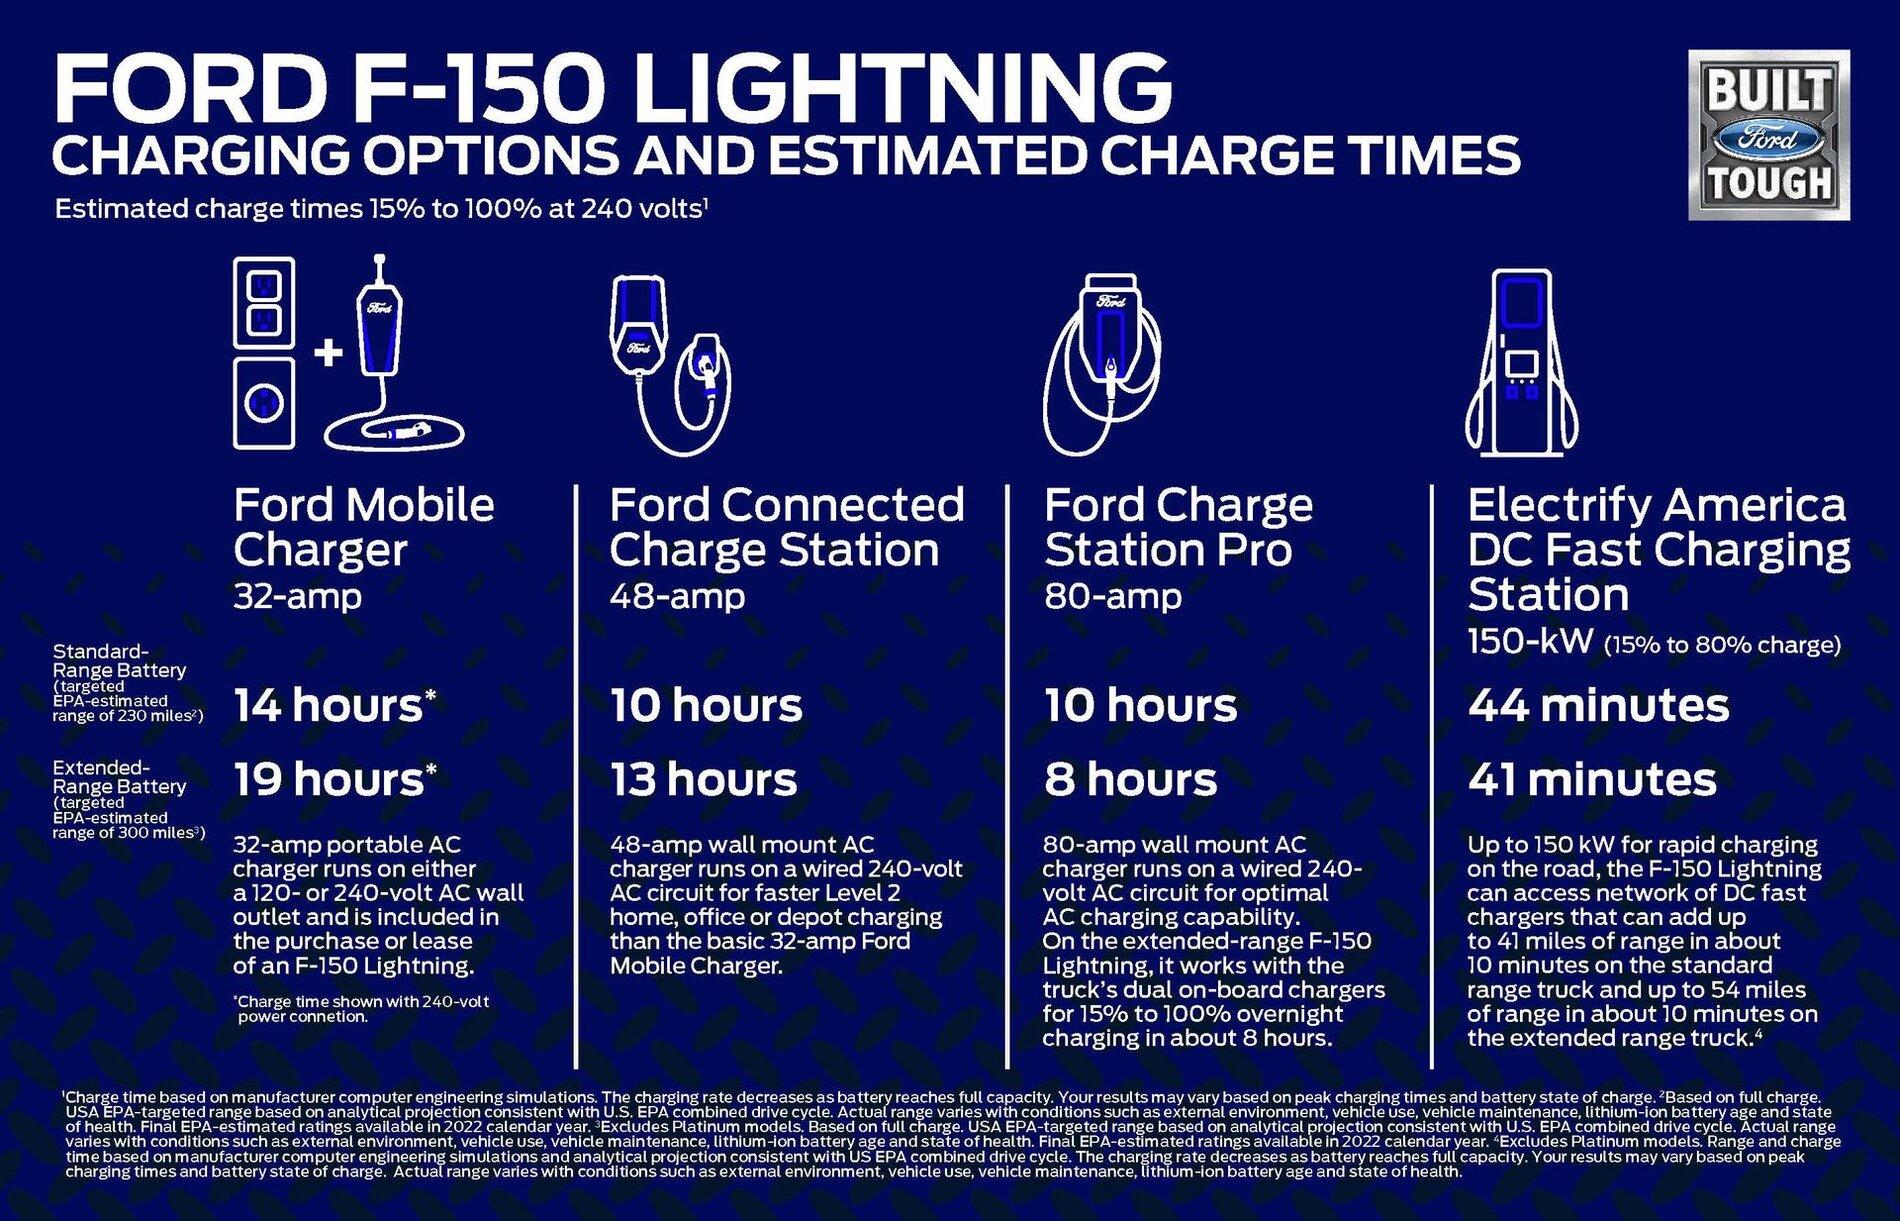 Ford F-150 Lightning Do I need to run new 400 amp service in my house for the Lightning + everything else? ford-f-150-lightning-charging-options-and-estimated-charge-times